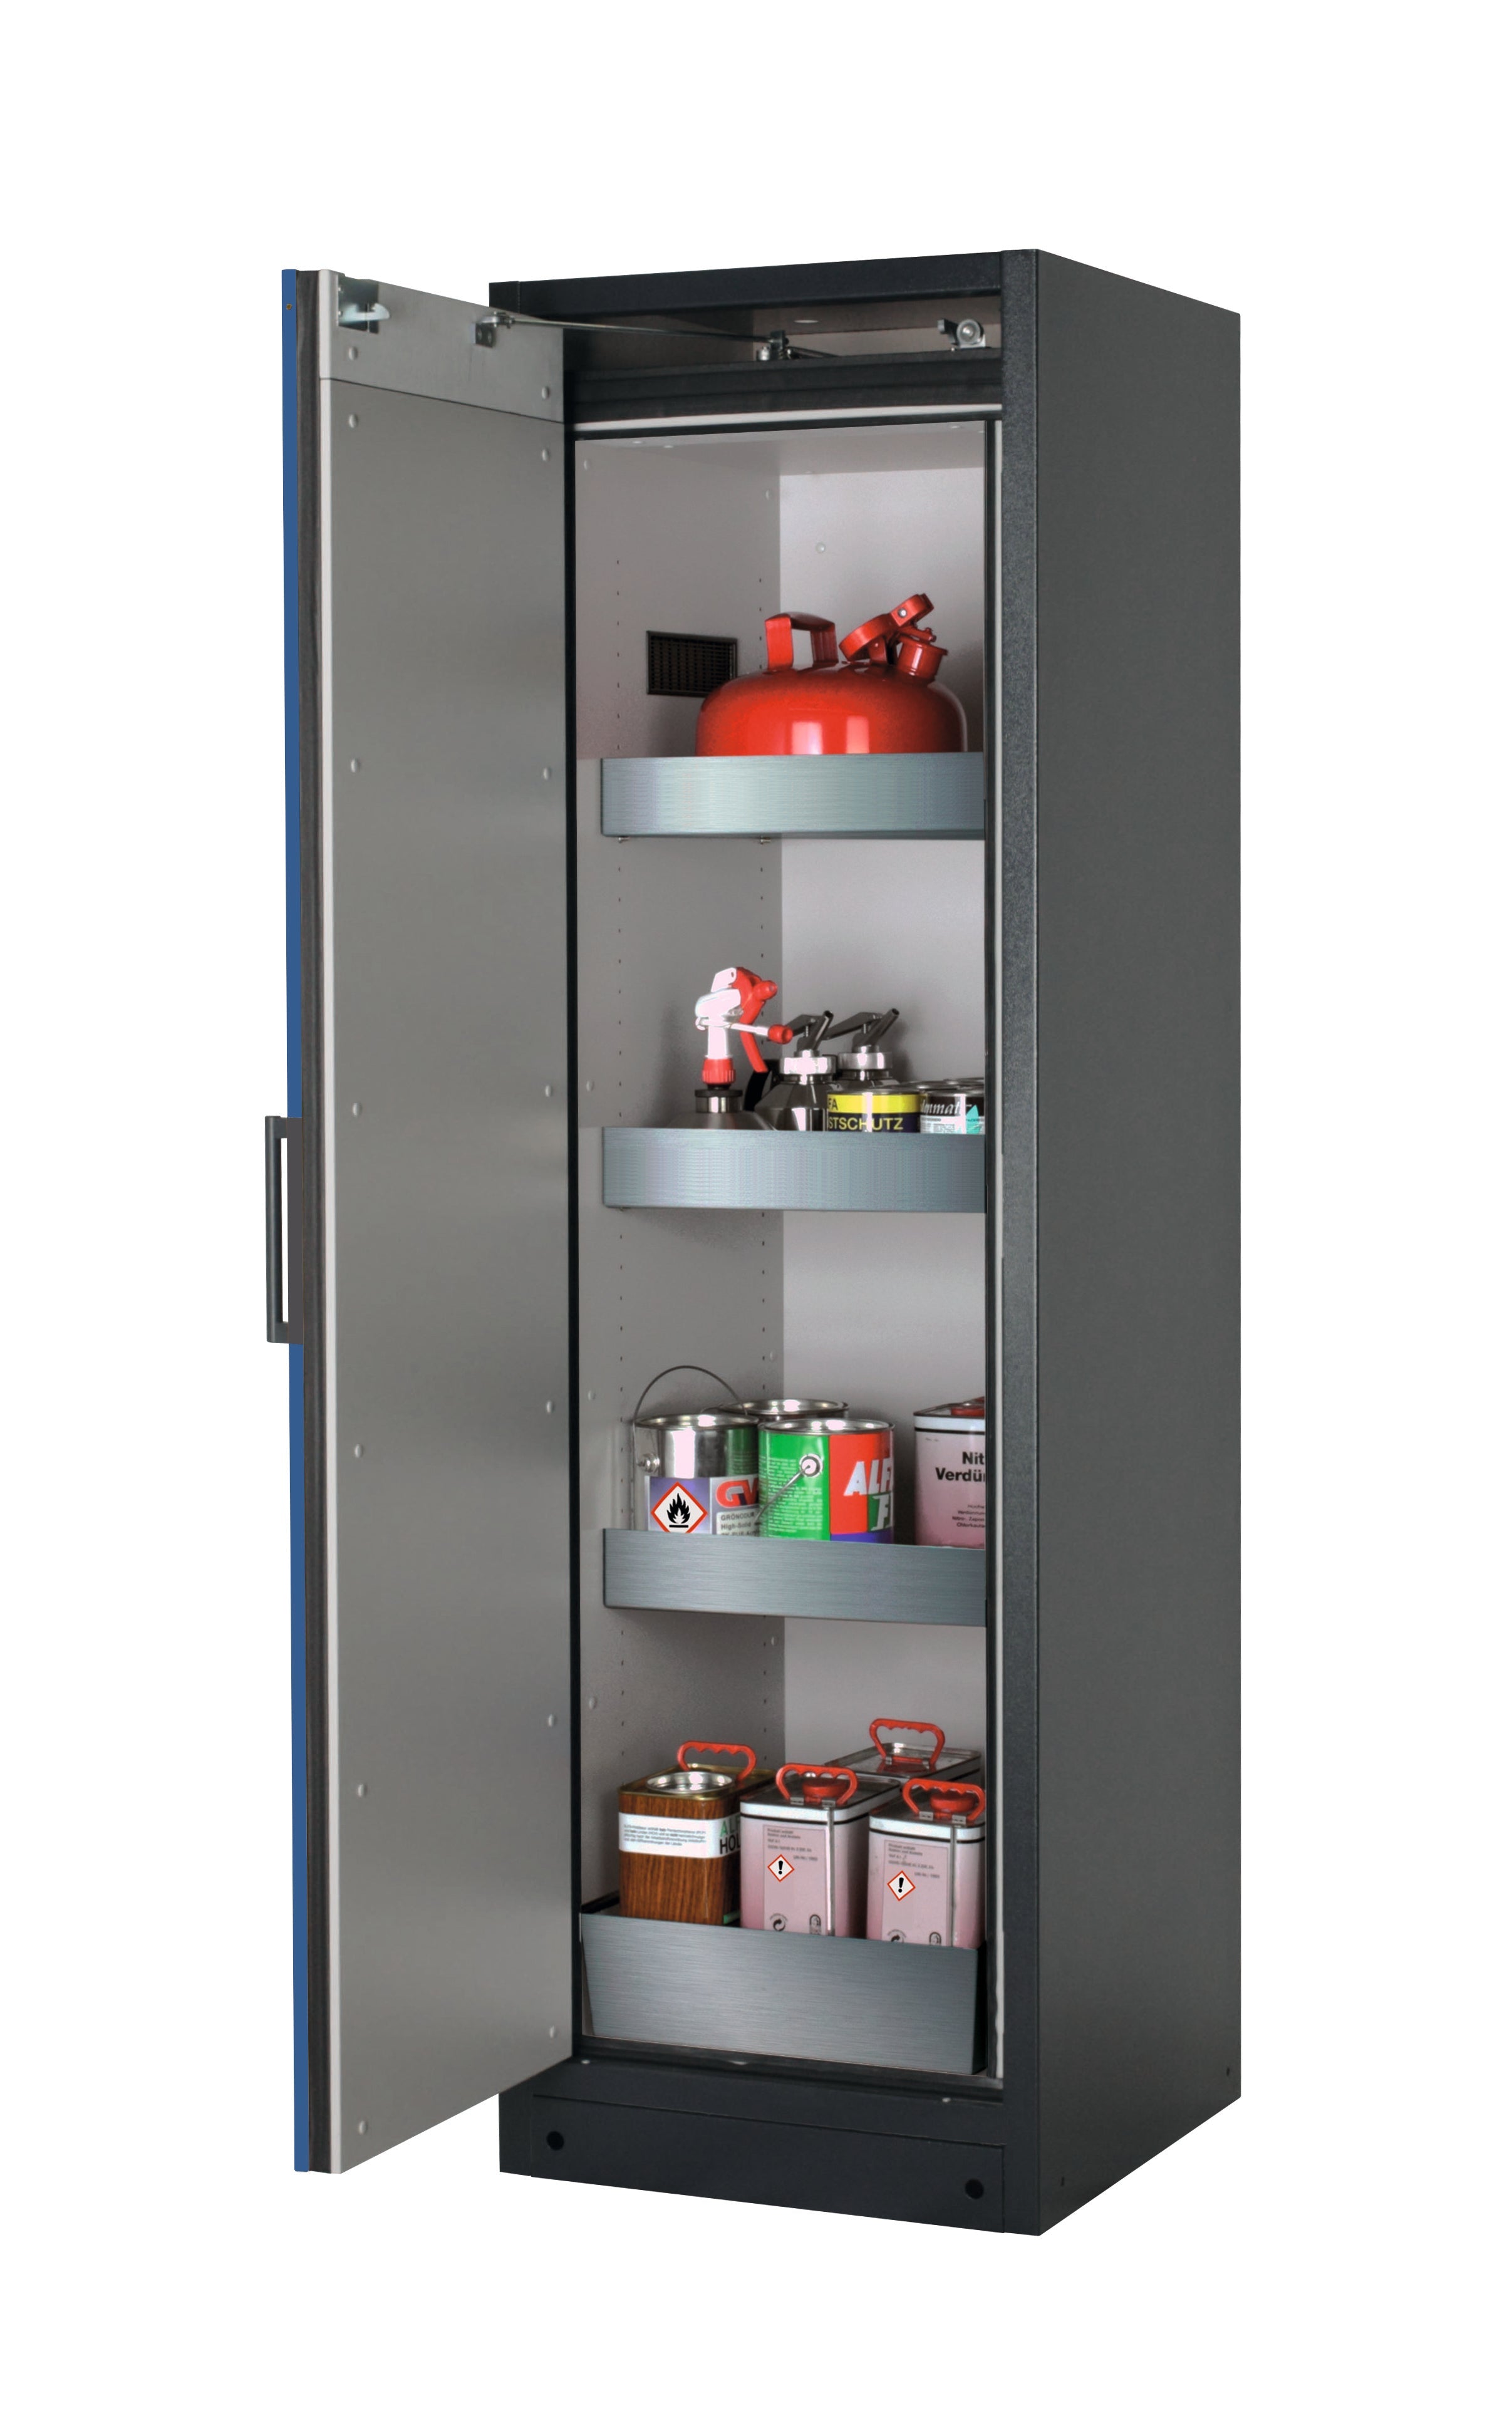 Type 90 safety storage cabinet Q-CLASSIC-90 model Q90.195.060 in gentian blue RAL 5010 with 3x tray shelf (standard) (stainless steel 1.4301),